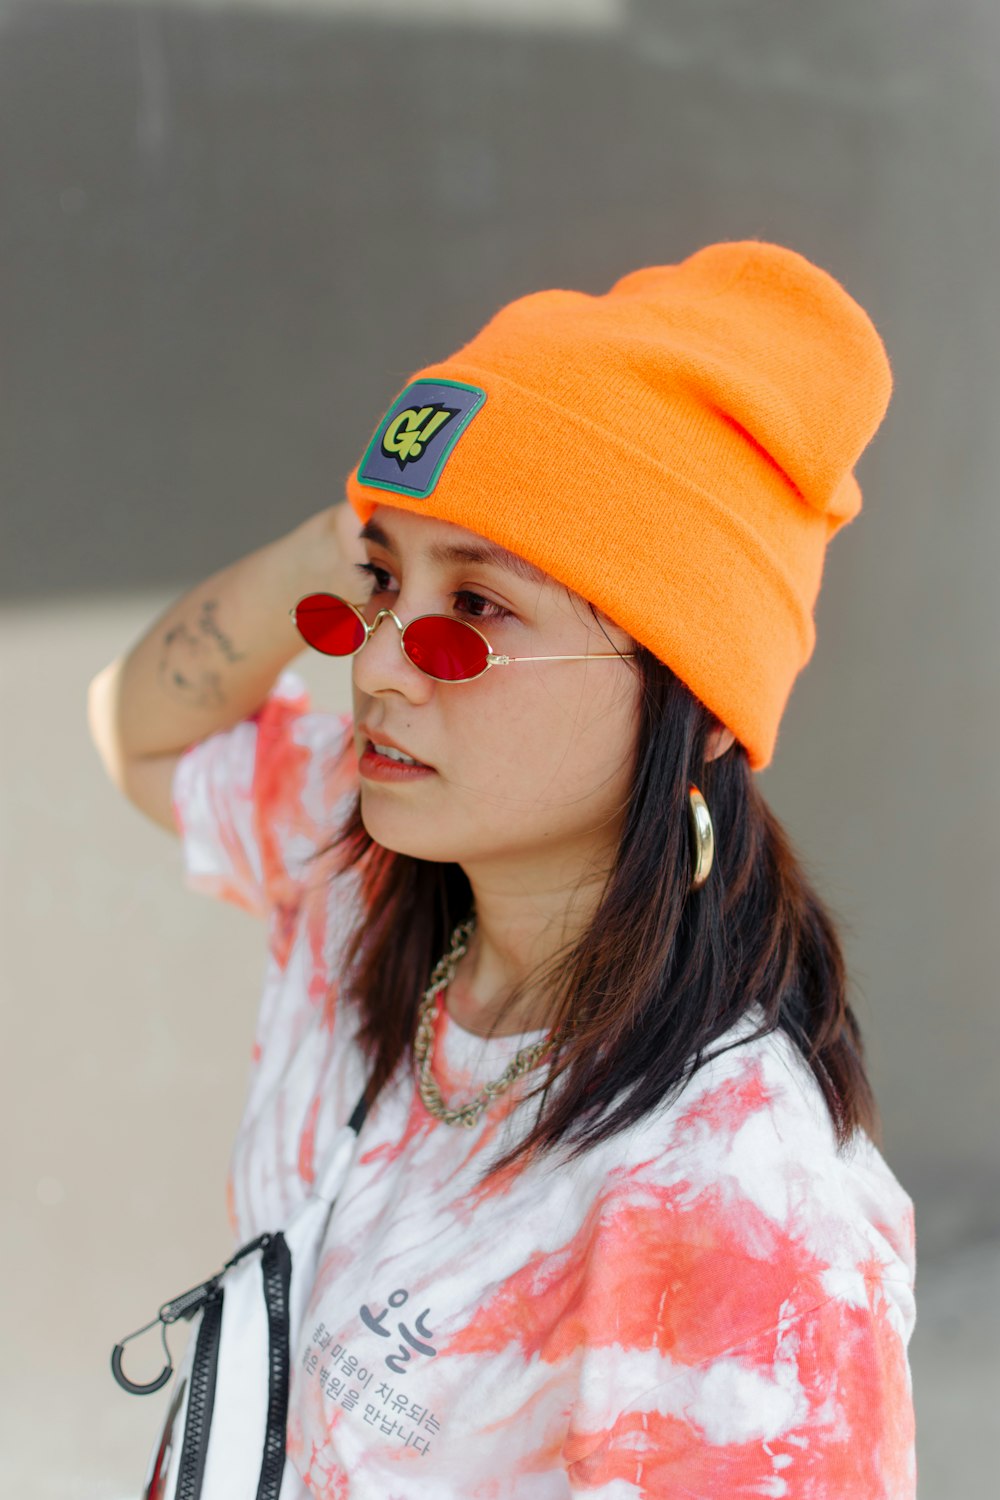 girl in white and pink floral shirt wearing orange knit cap